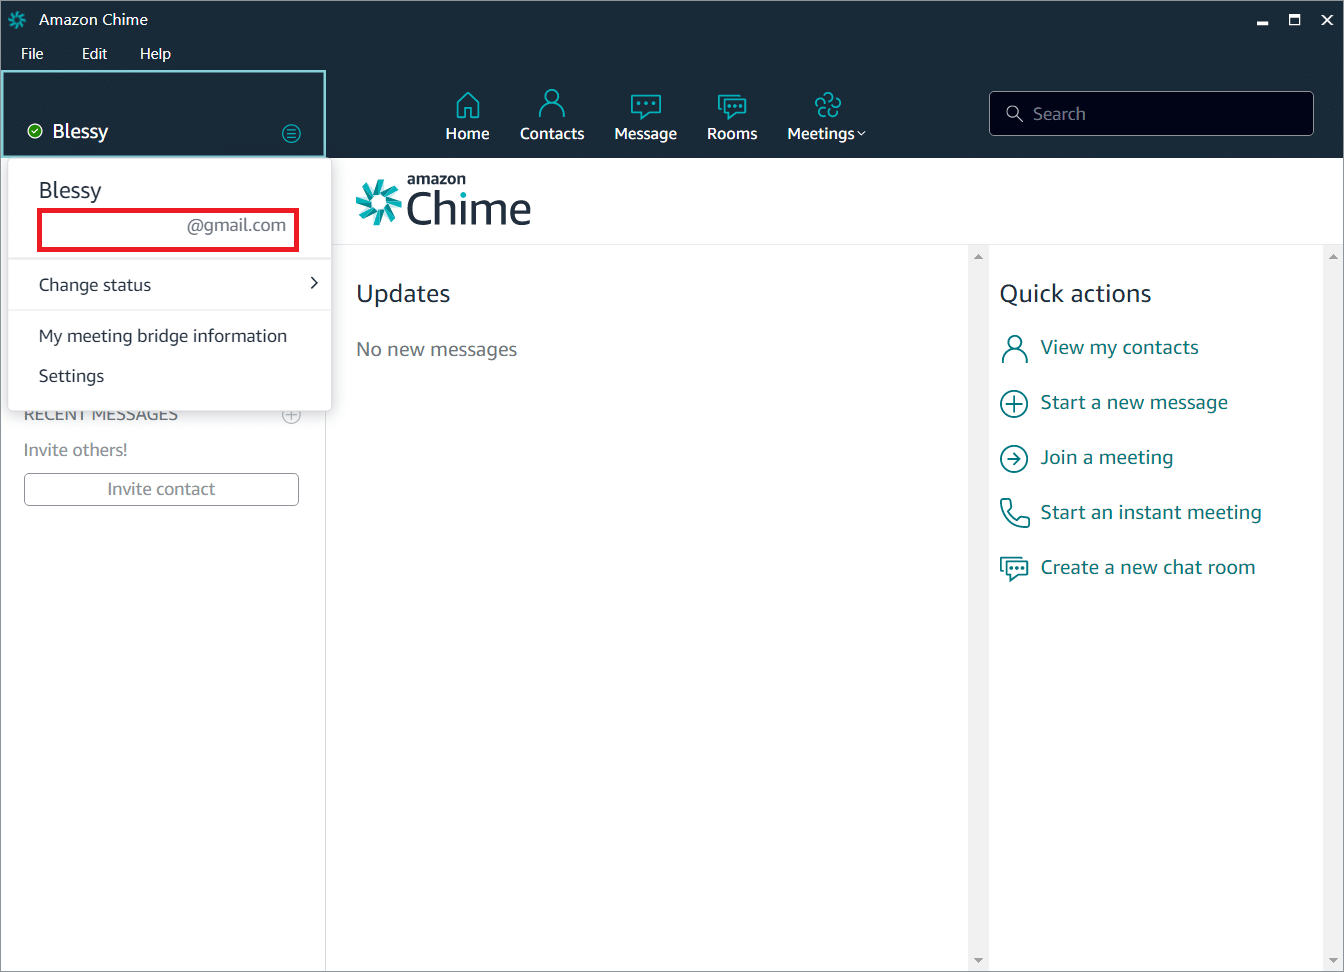 you can find the Chime ID